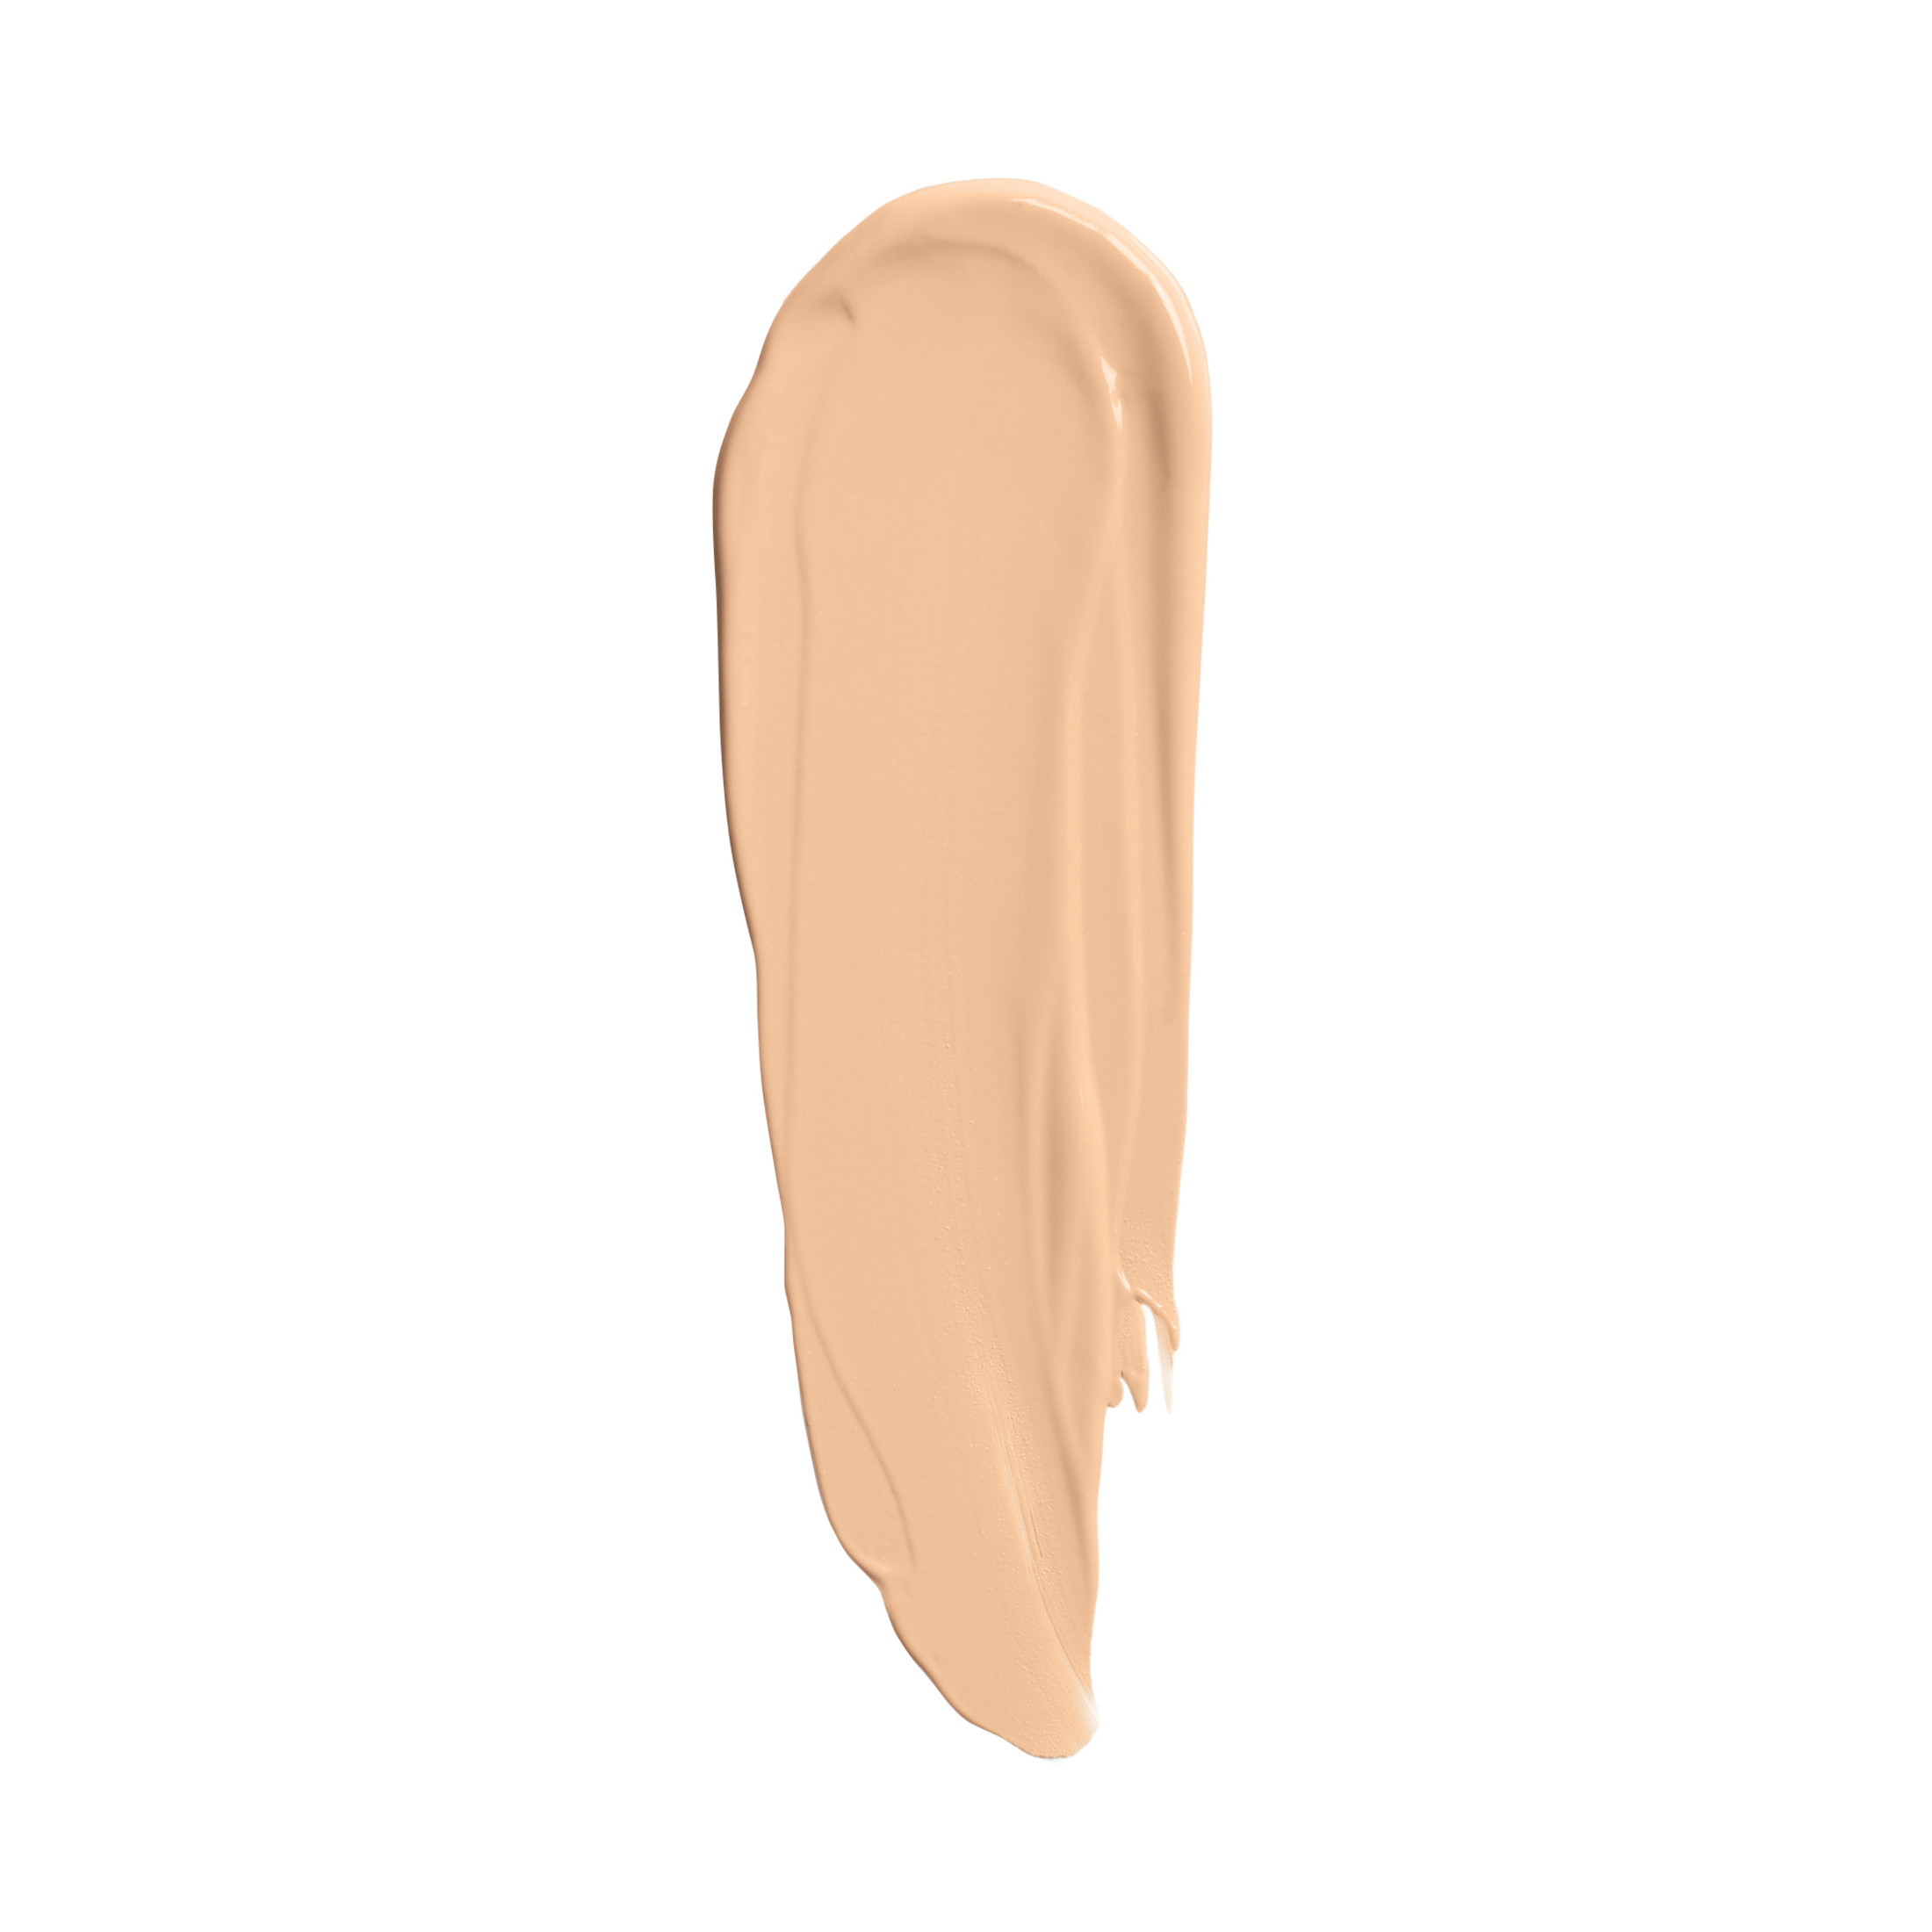 COVERGIRL Outlast All-Day Stay Fabulous 3-in-1 Foundation, 850 Creamy Beige - image 5 of 6